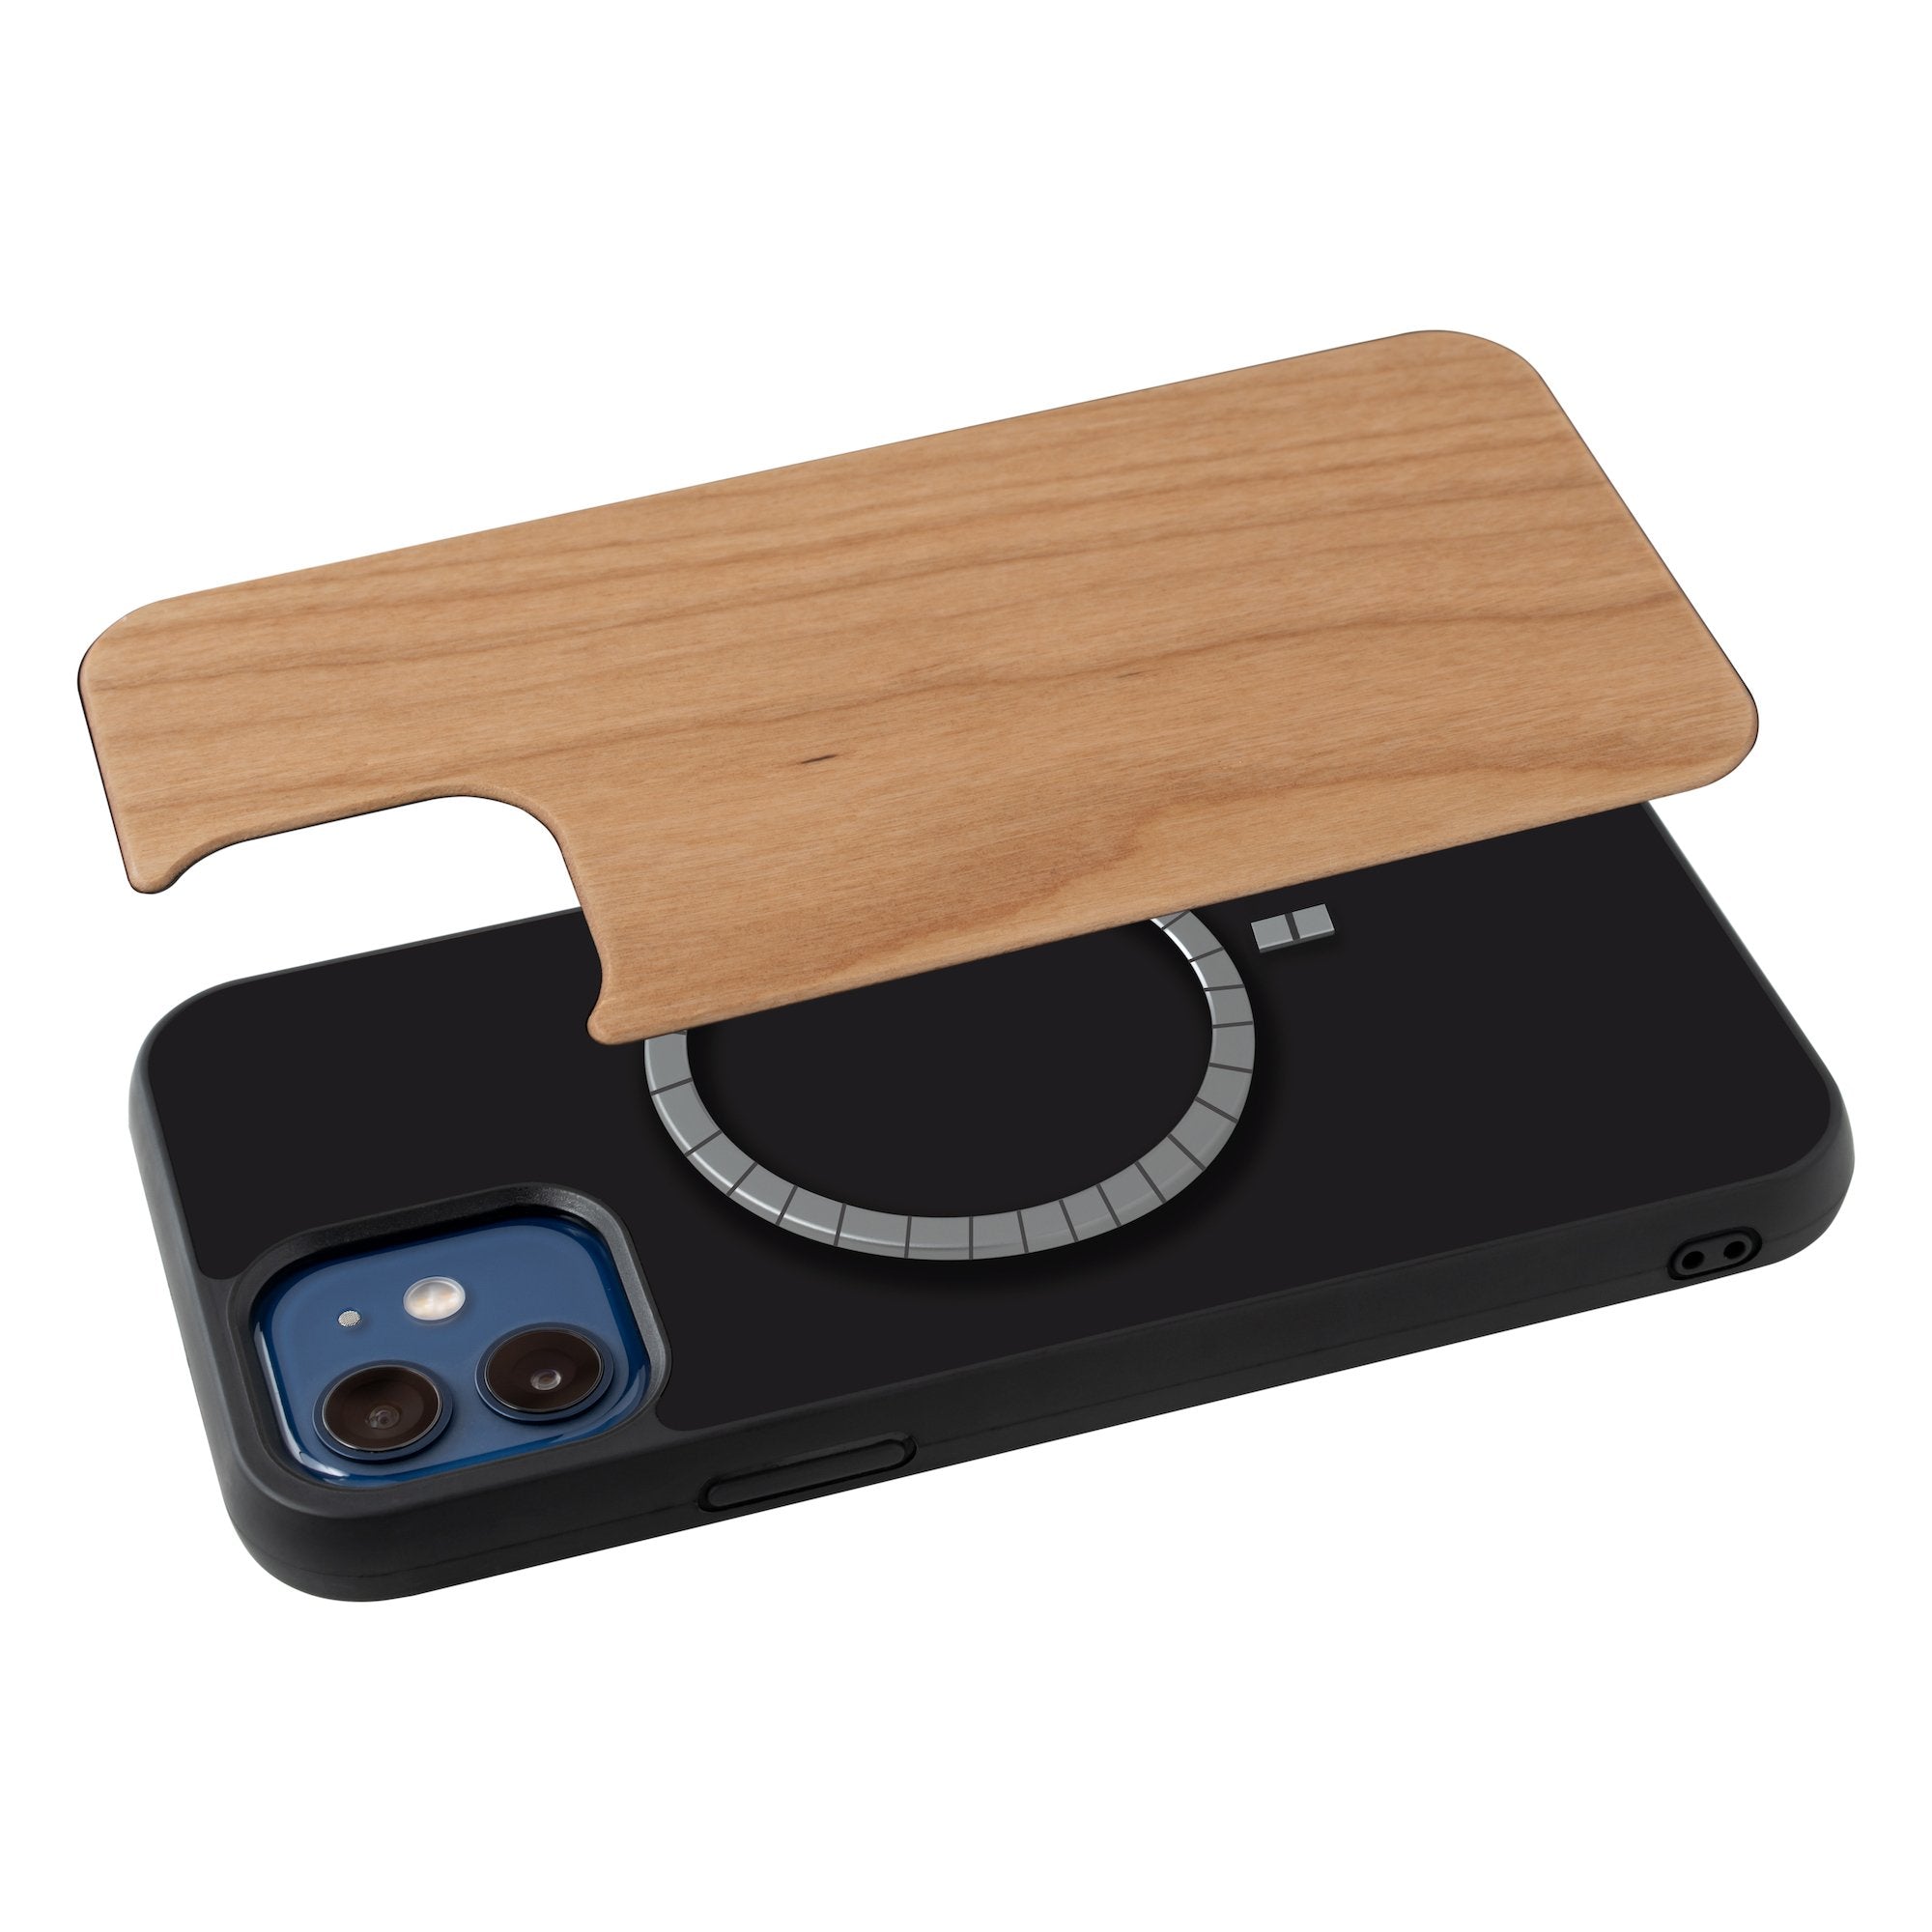 Wooden MagSafe Case for iPhone 12 Series - Oakywood - Storming Gravity